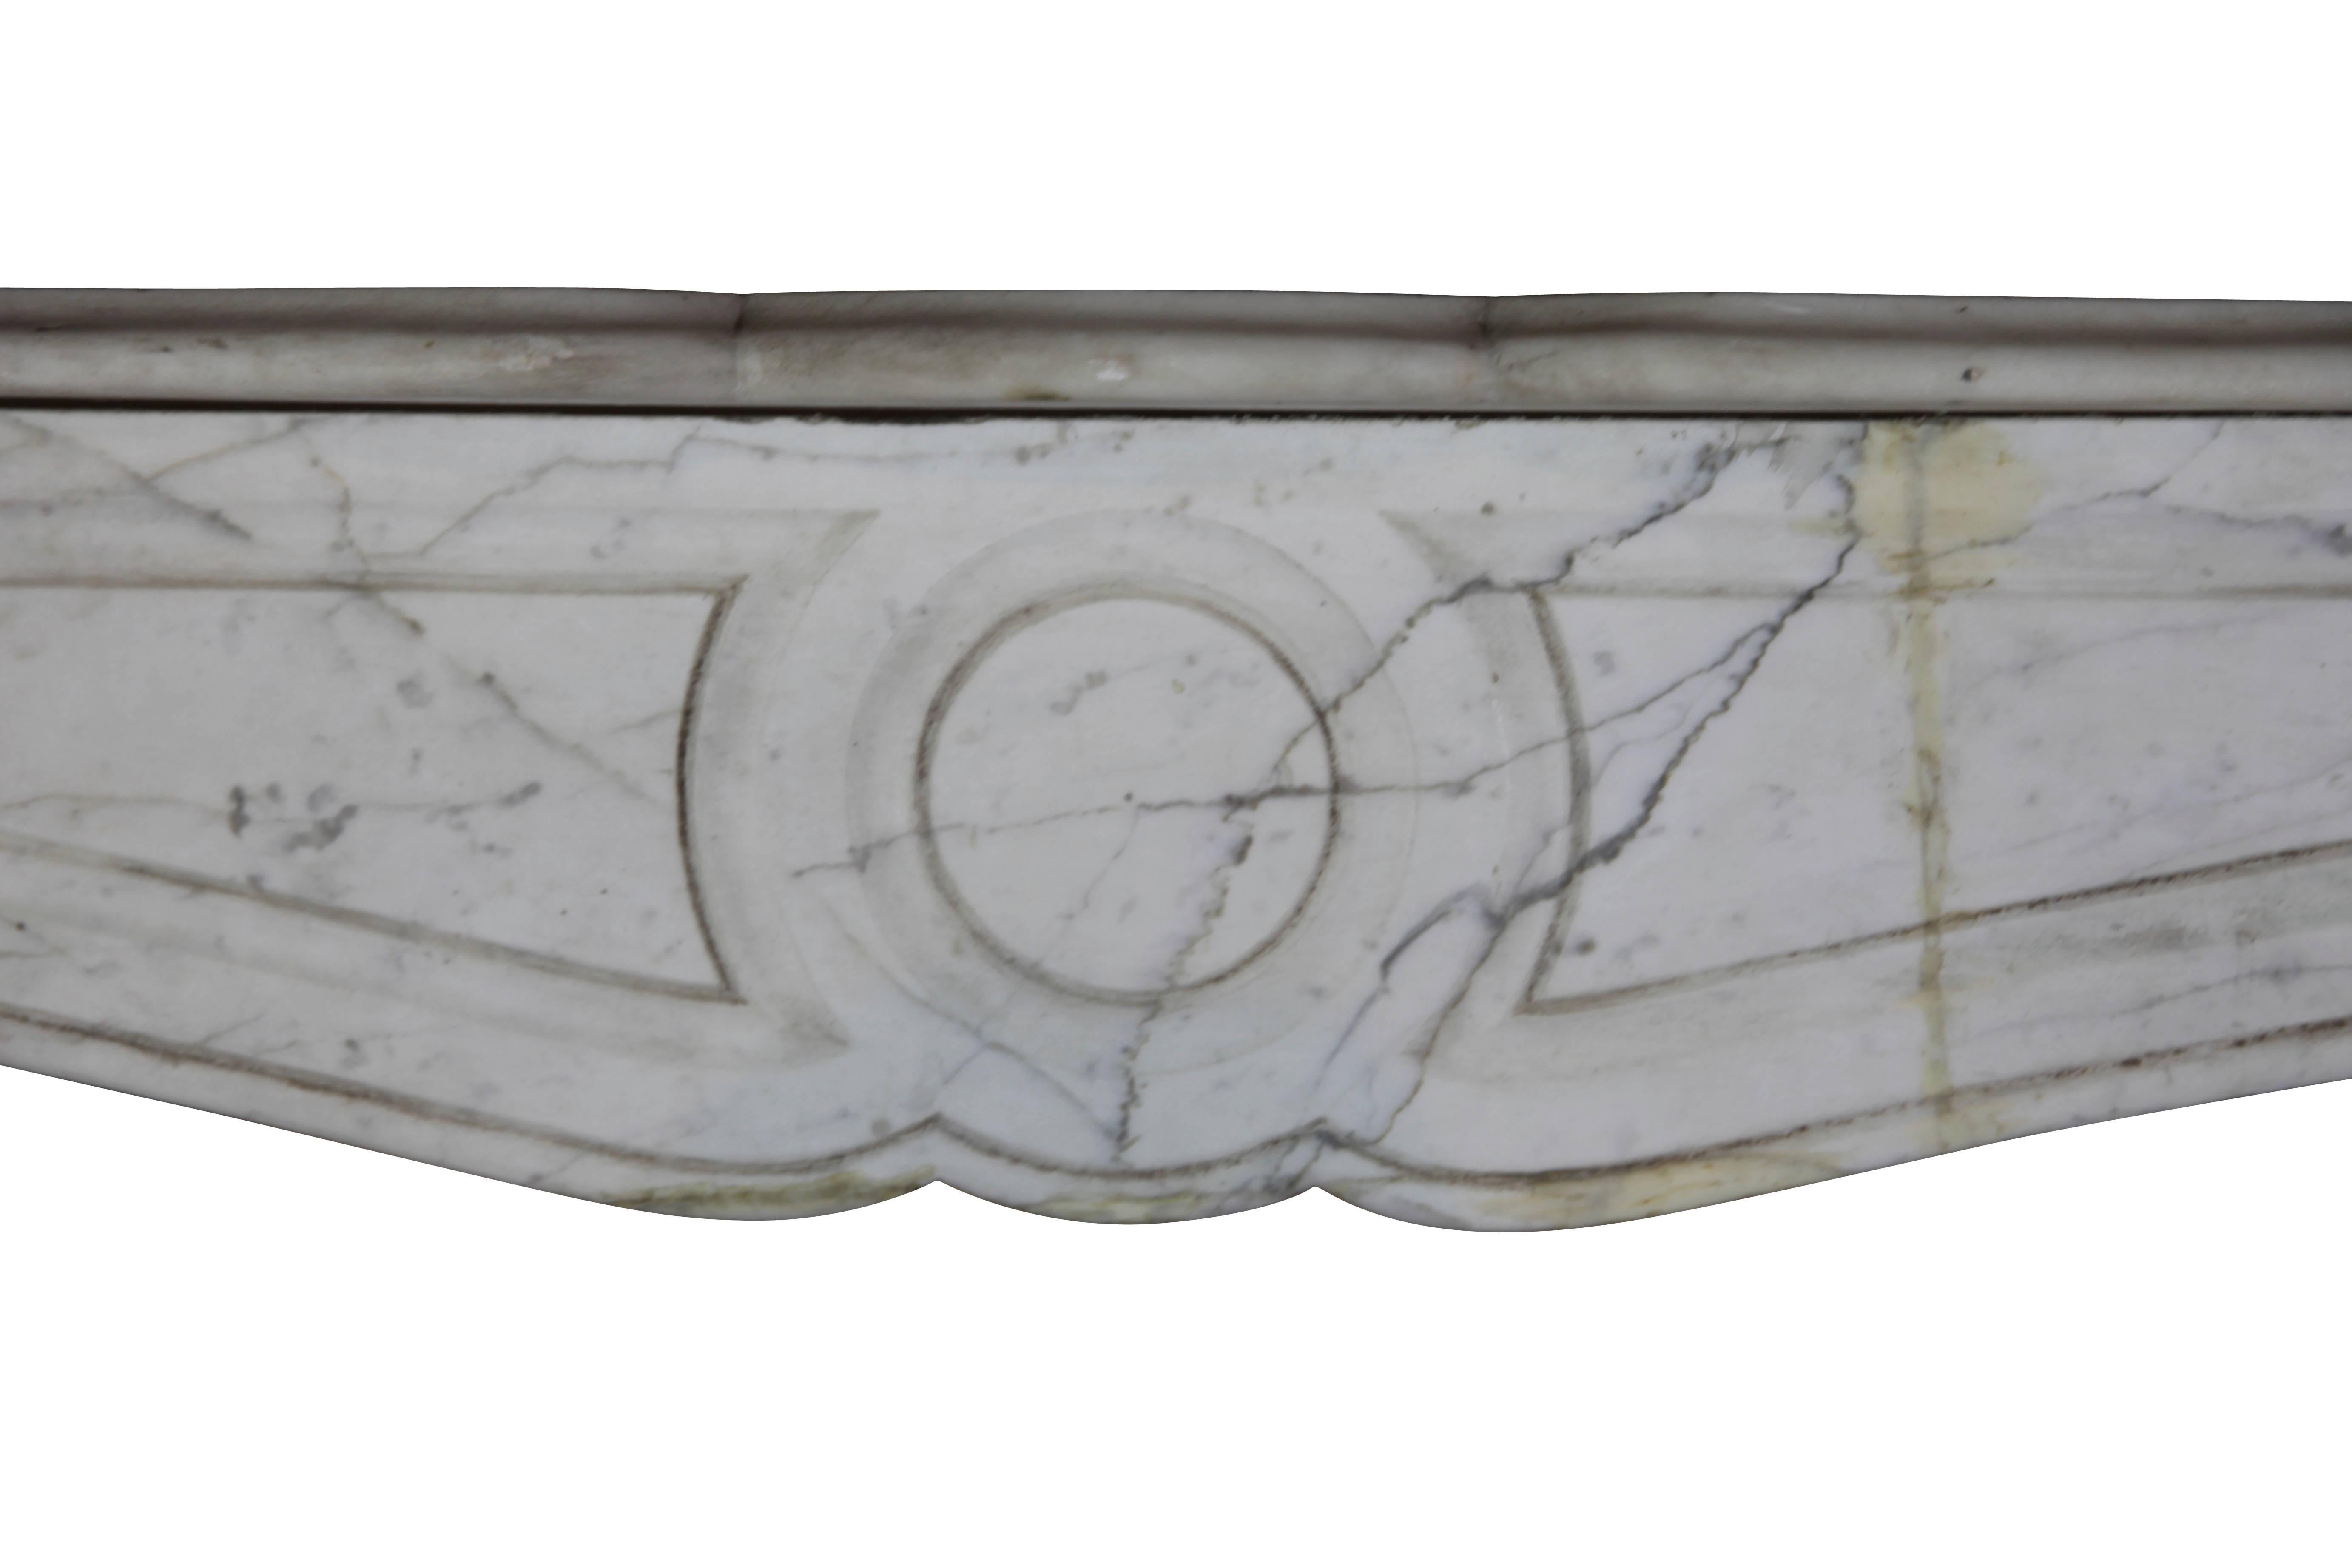 This Pompadour style fireplace surround in white Carrara marble can be used as a decorative element to be painted. The mantel has been restored.
Measures:
132 cm EW 51.97”
103 cm EH 40.55”
91 cm IW 35.82